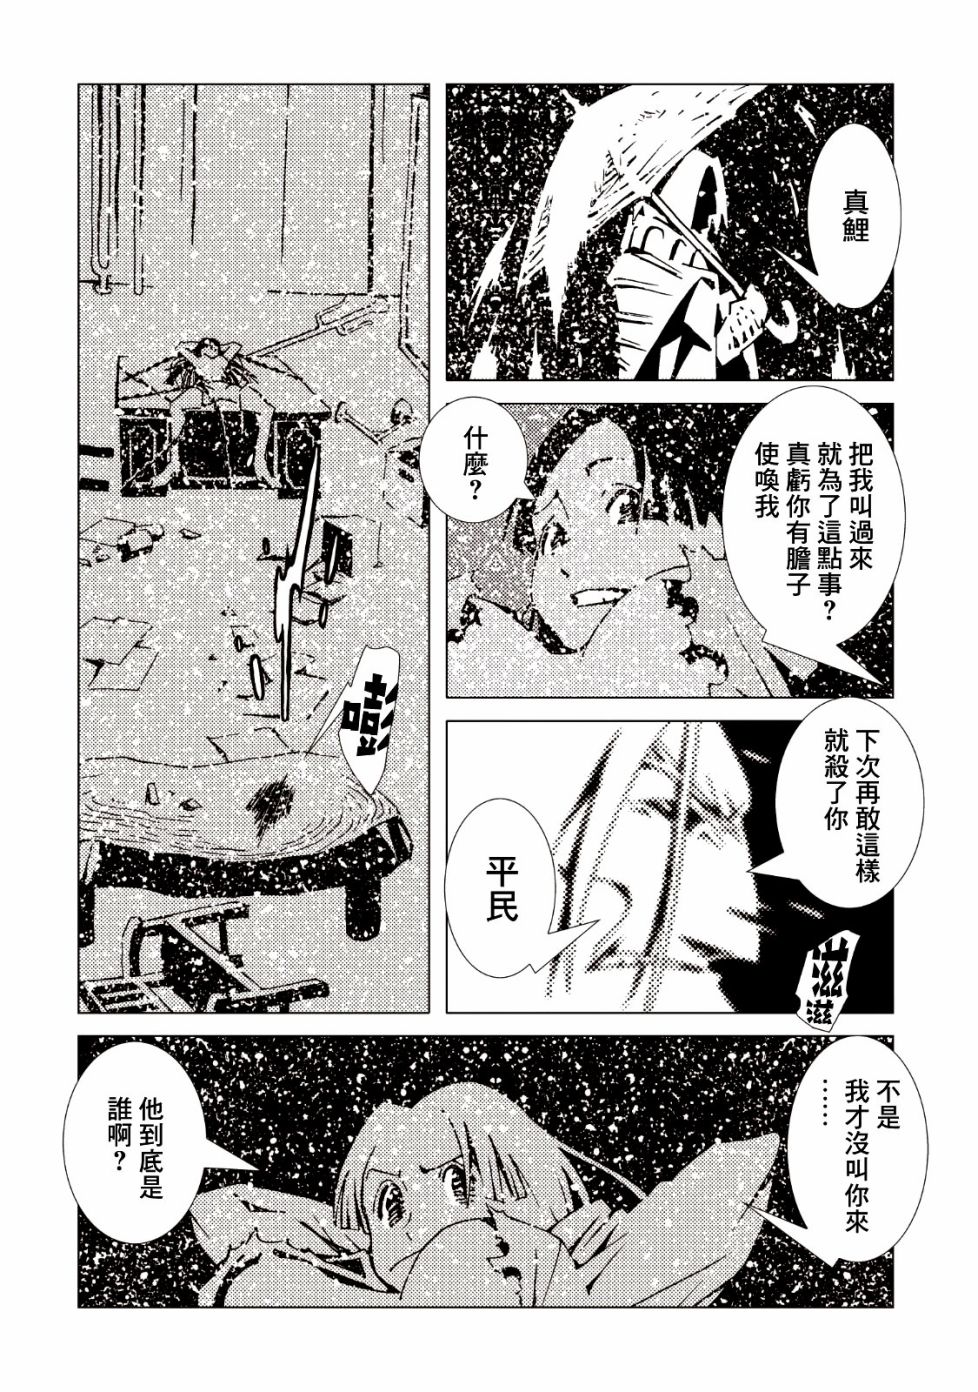 AREA51 - 第37話 - 7